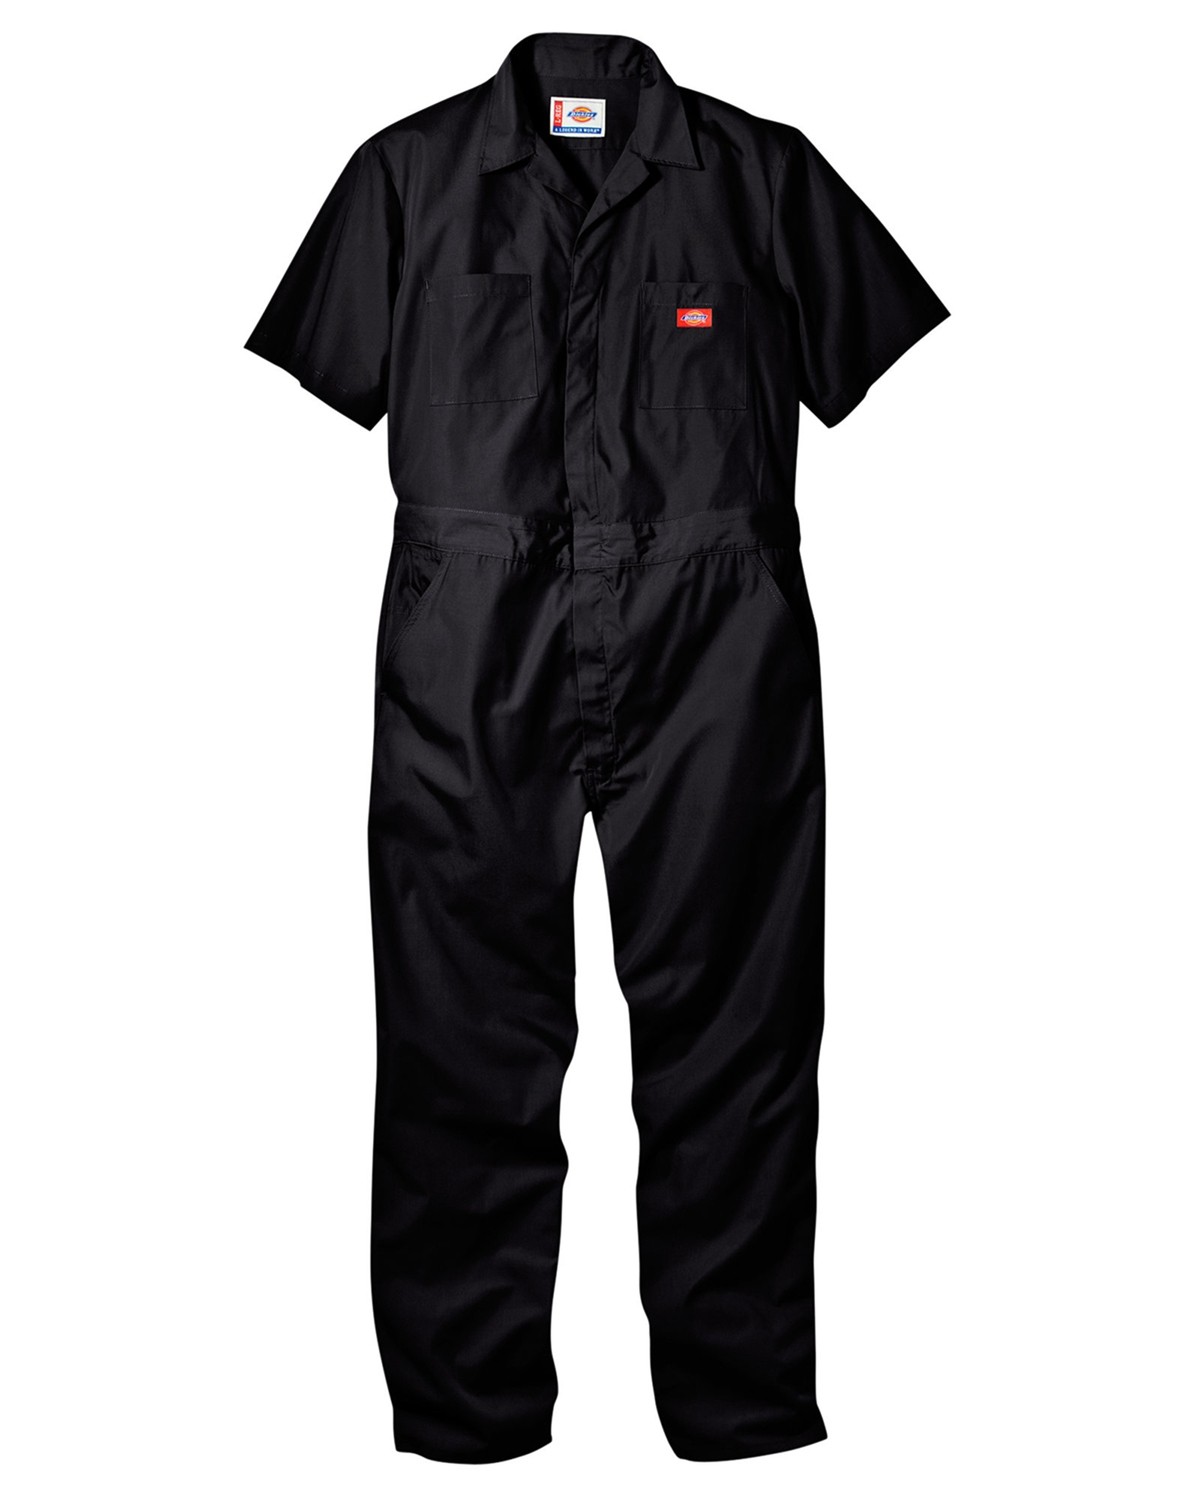 Berne NI417T Men's Tall Icecap Insulated Coverall Black LT